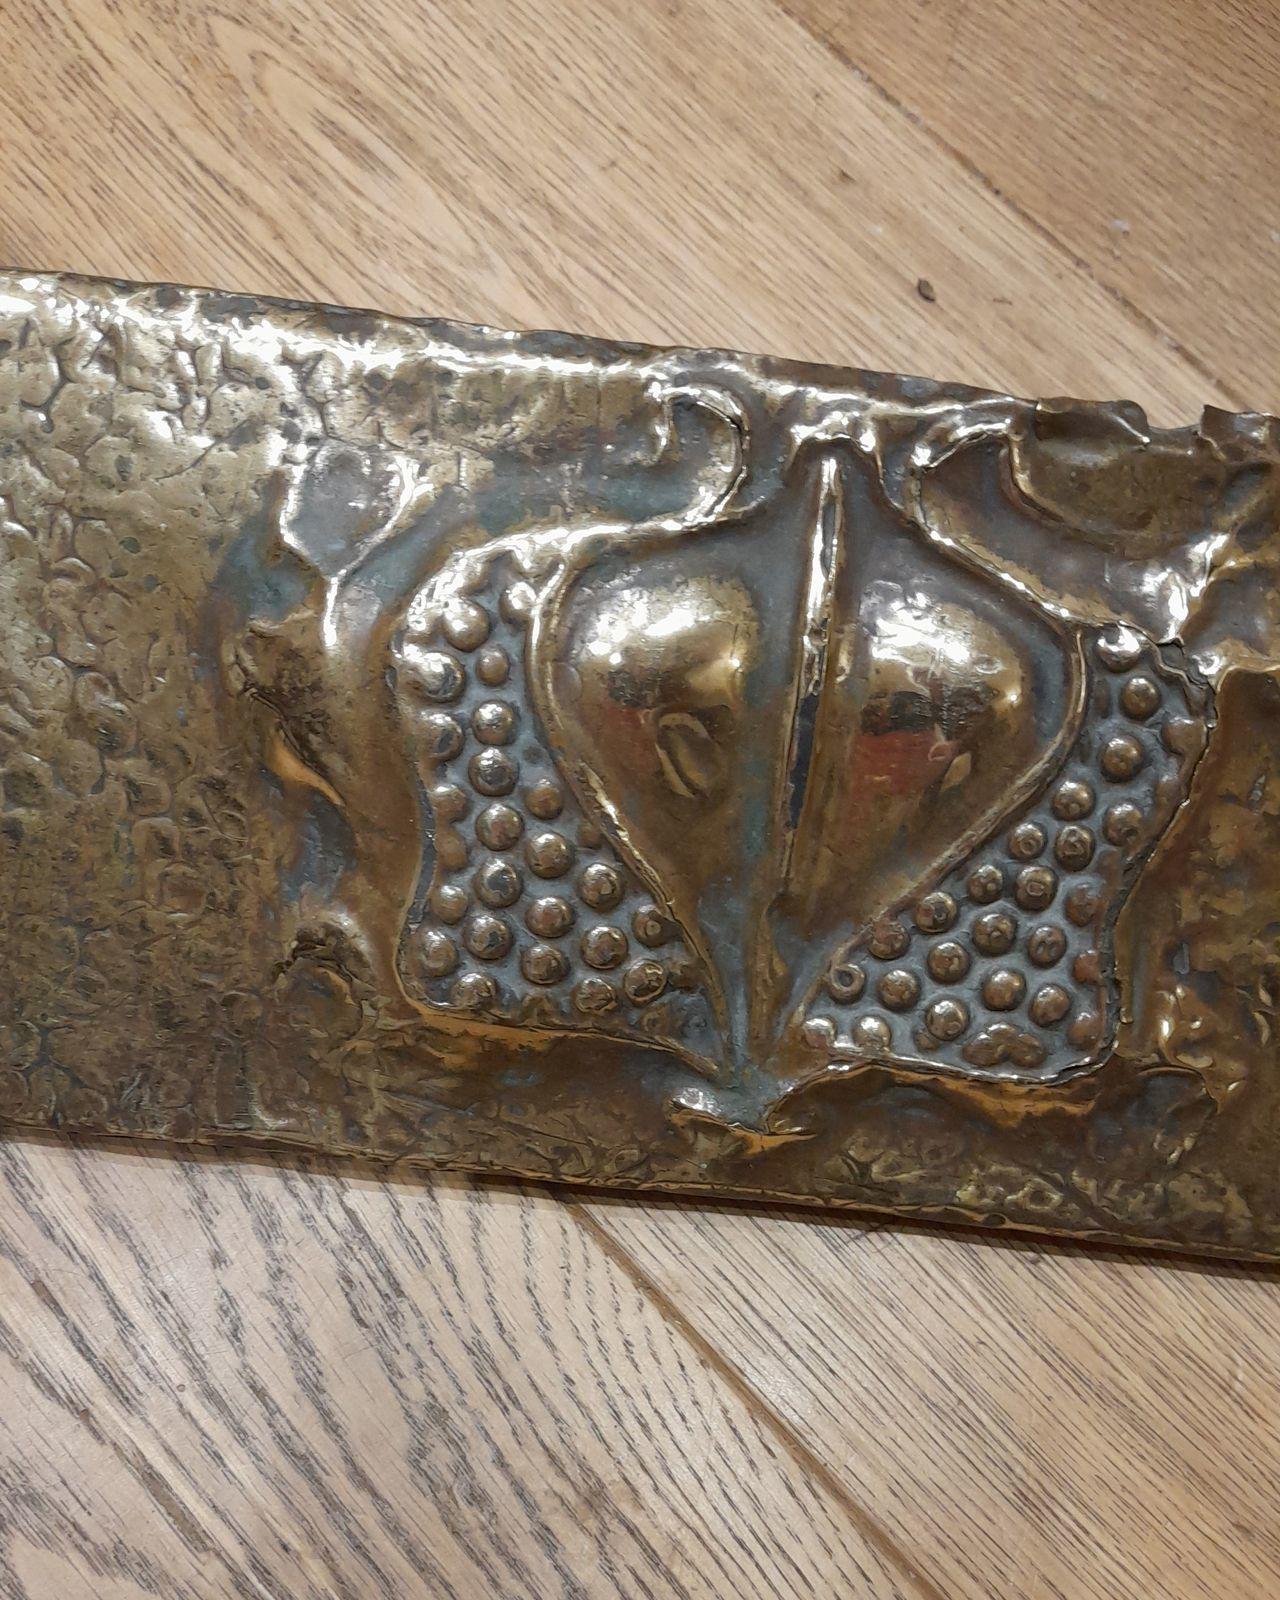 An antique brass Arts & Crafts or Art Nouveau repousse decorated fire fender or fire kerb decorated with stylised pomegranates and hearts circa 1900